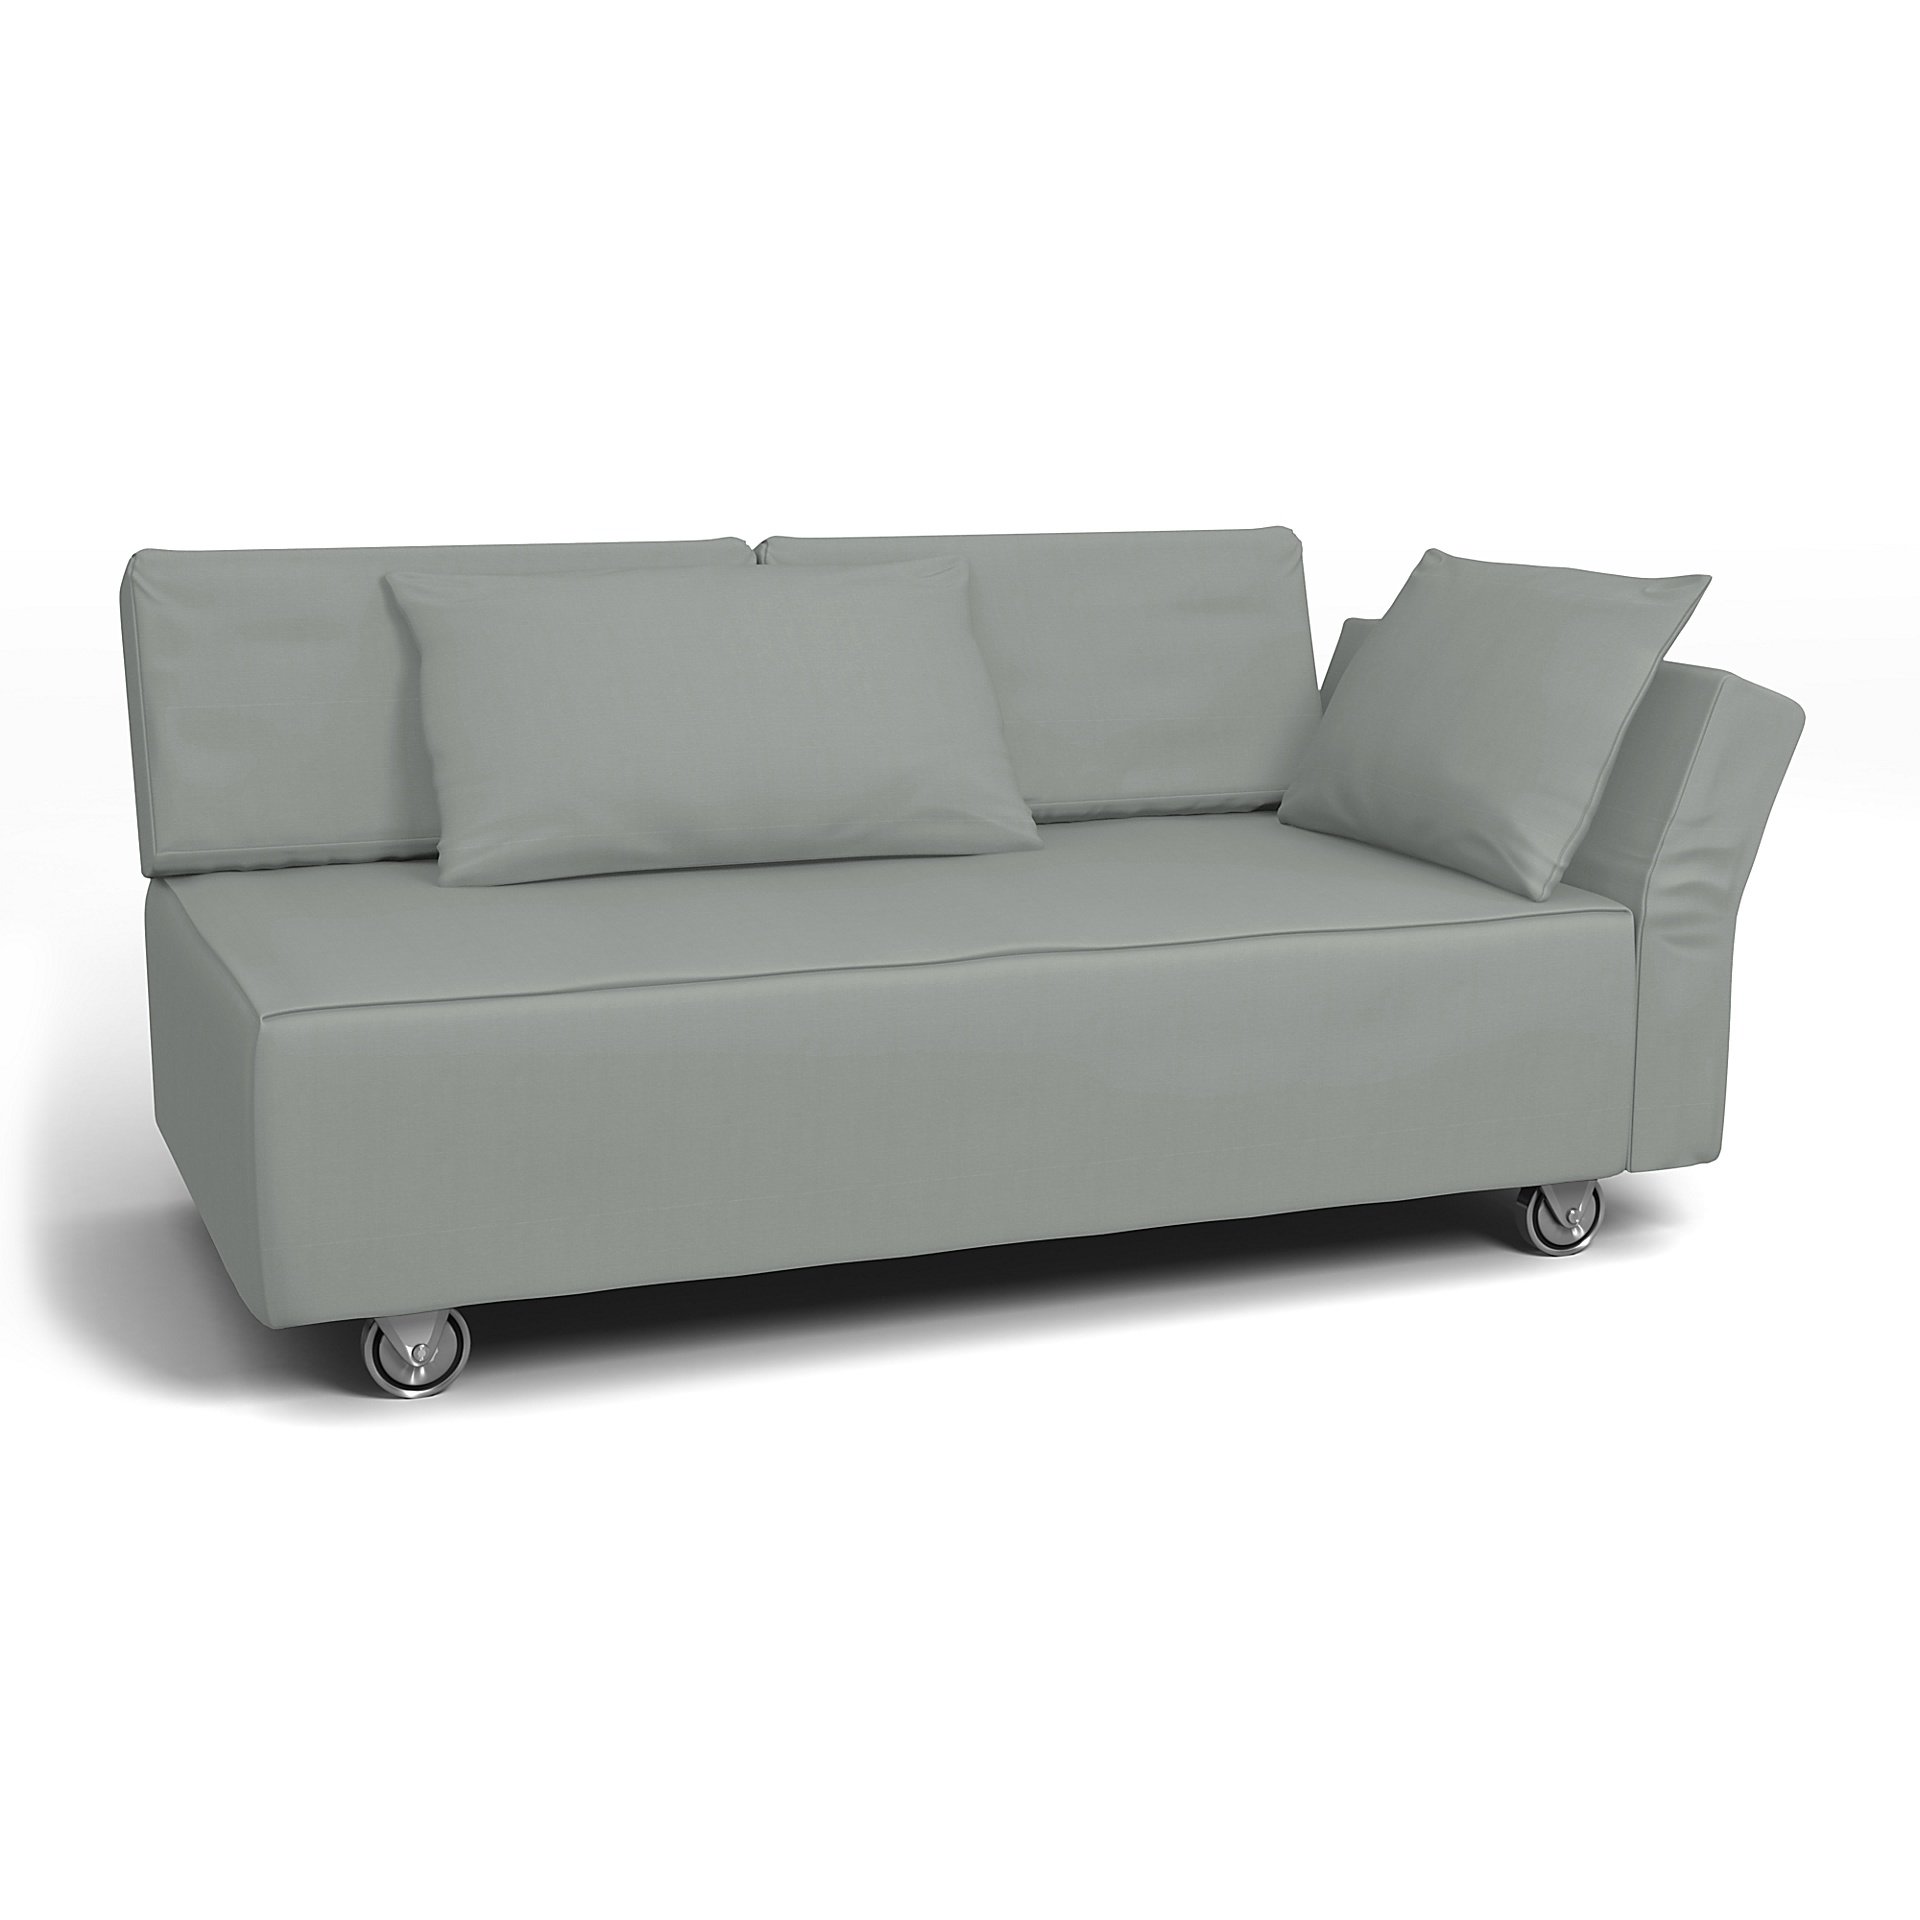 IKEA - Falsterbo 2 Seat Sofa with Right Arm Cover, Drizzle, Cotton - Bemz